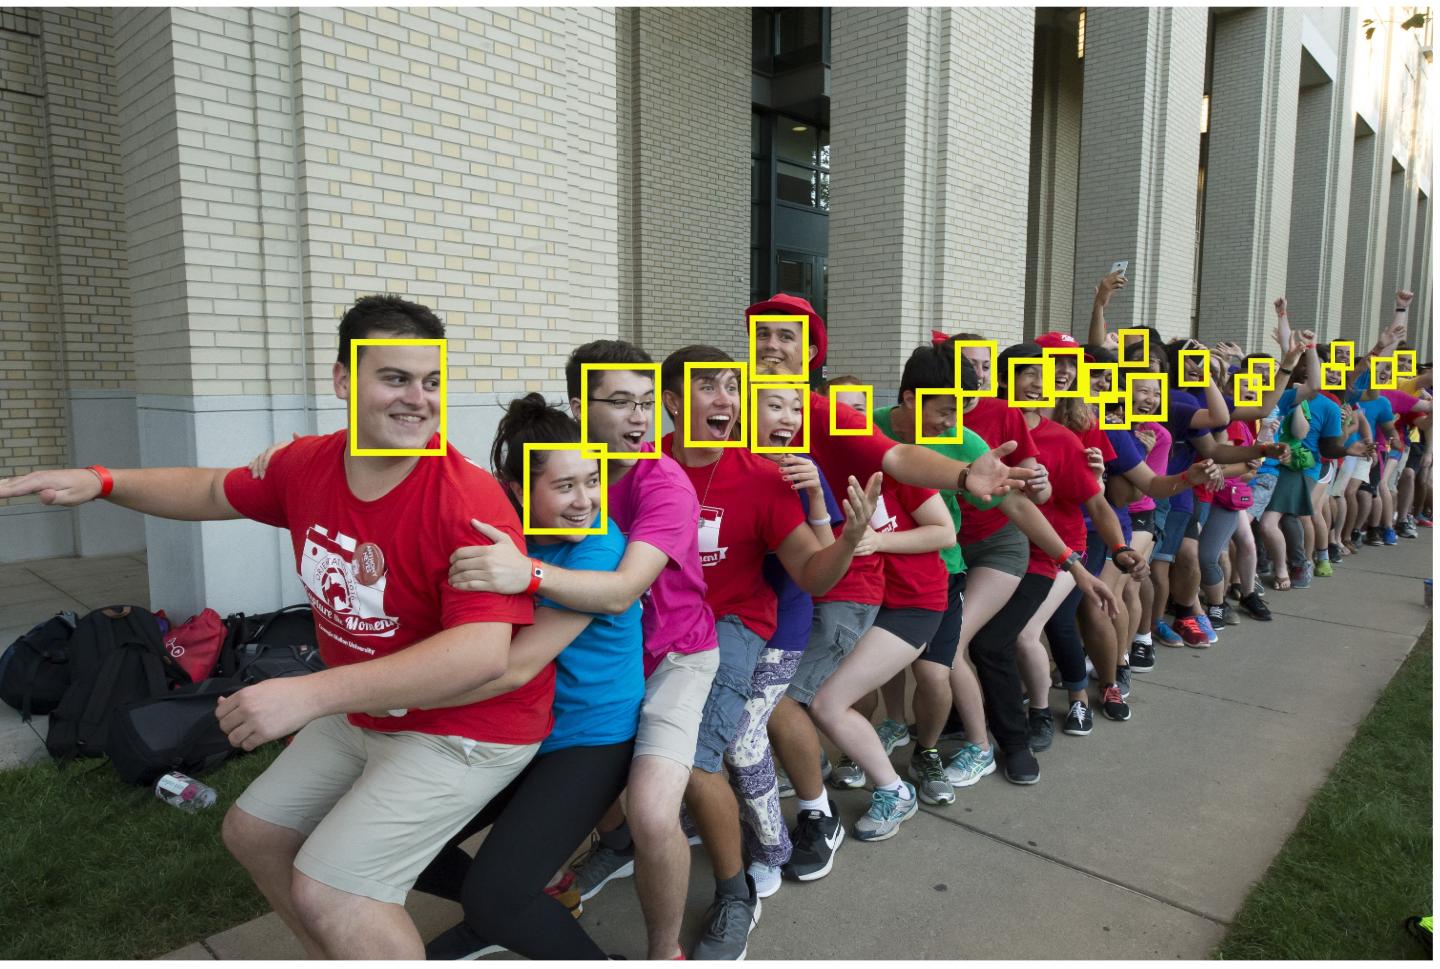 Detecting Tiny Faces in Images